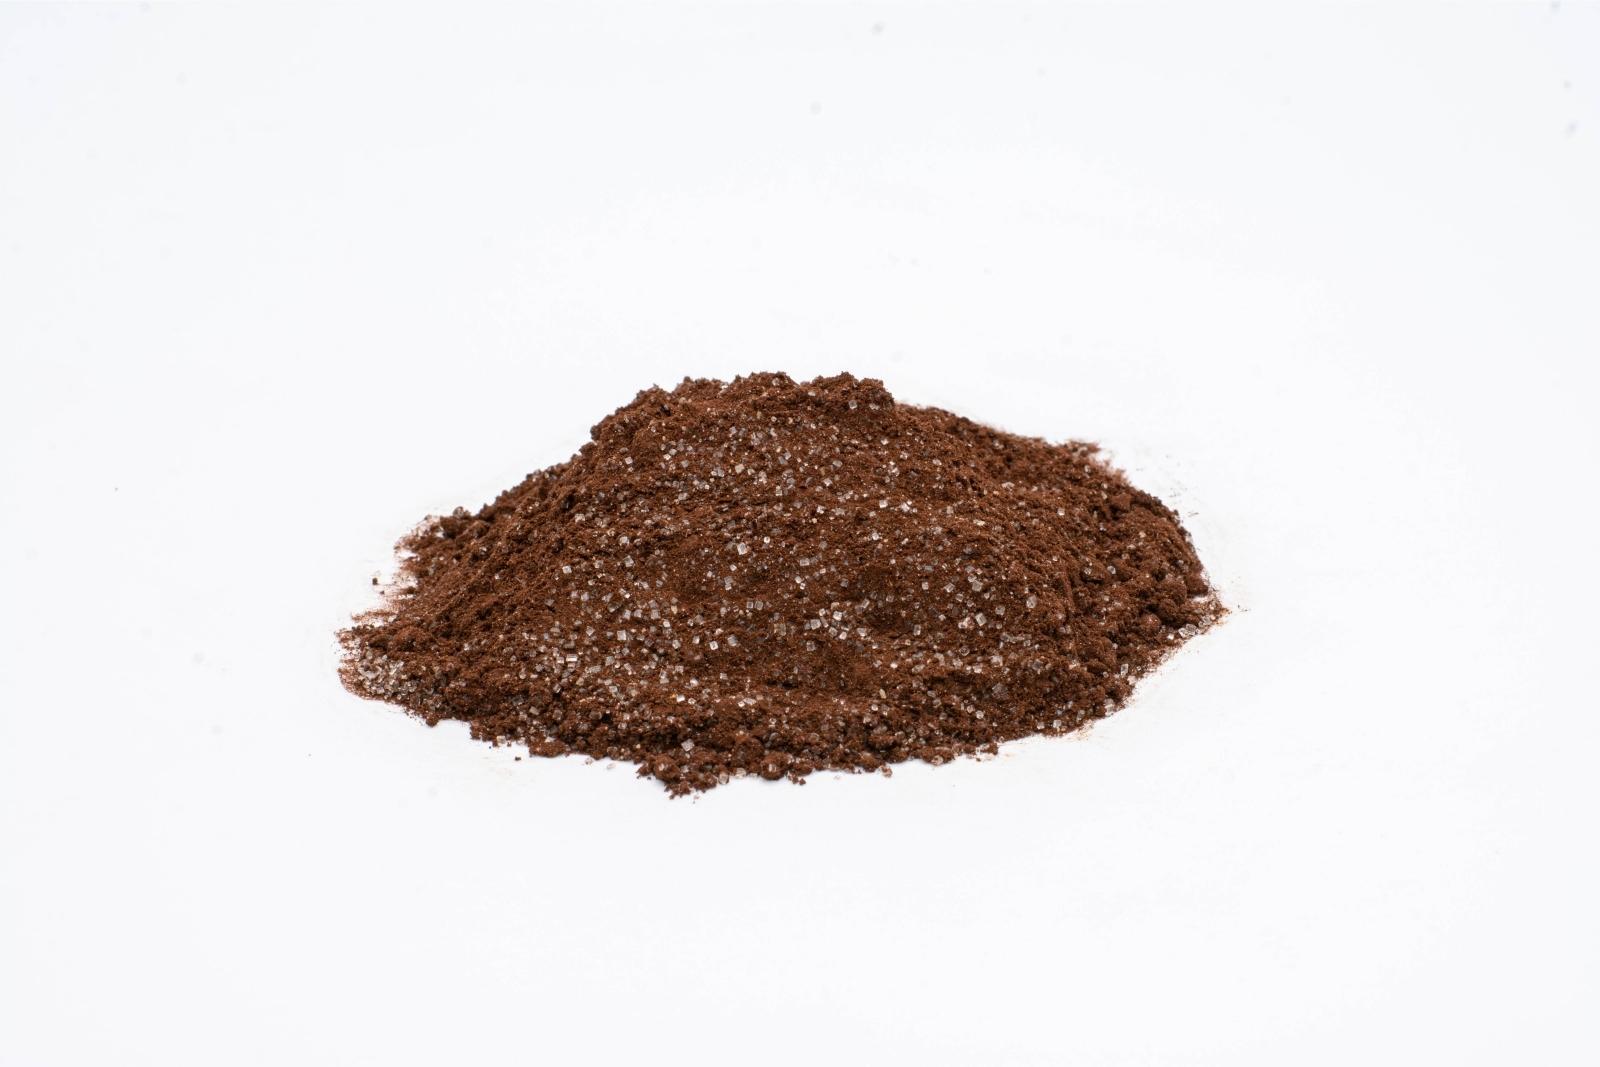 A pile of loose Peppermint Treat CBD Cocoa mix by The Brothers Apothecary, on a white background